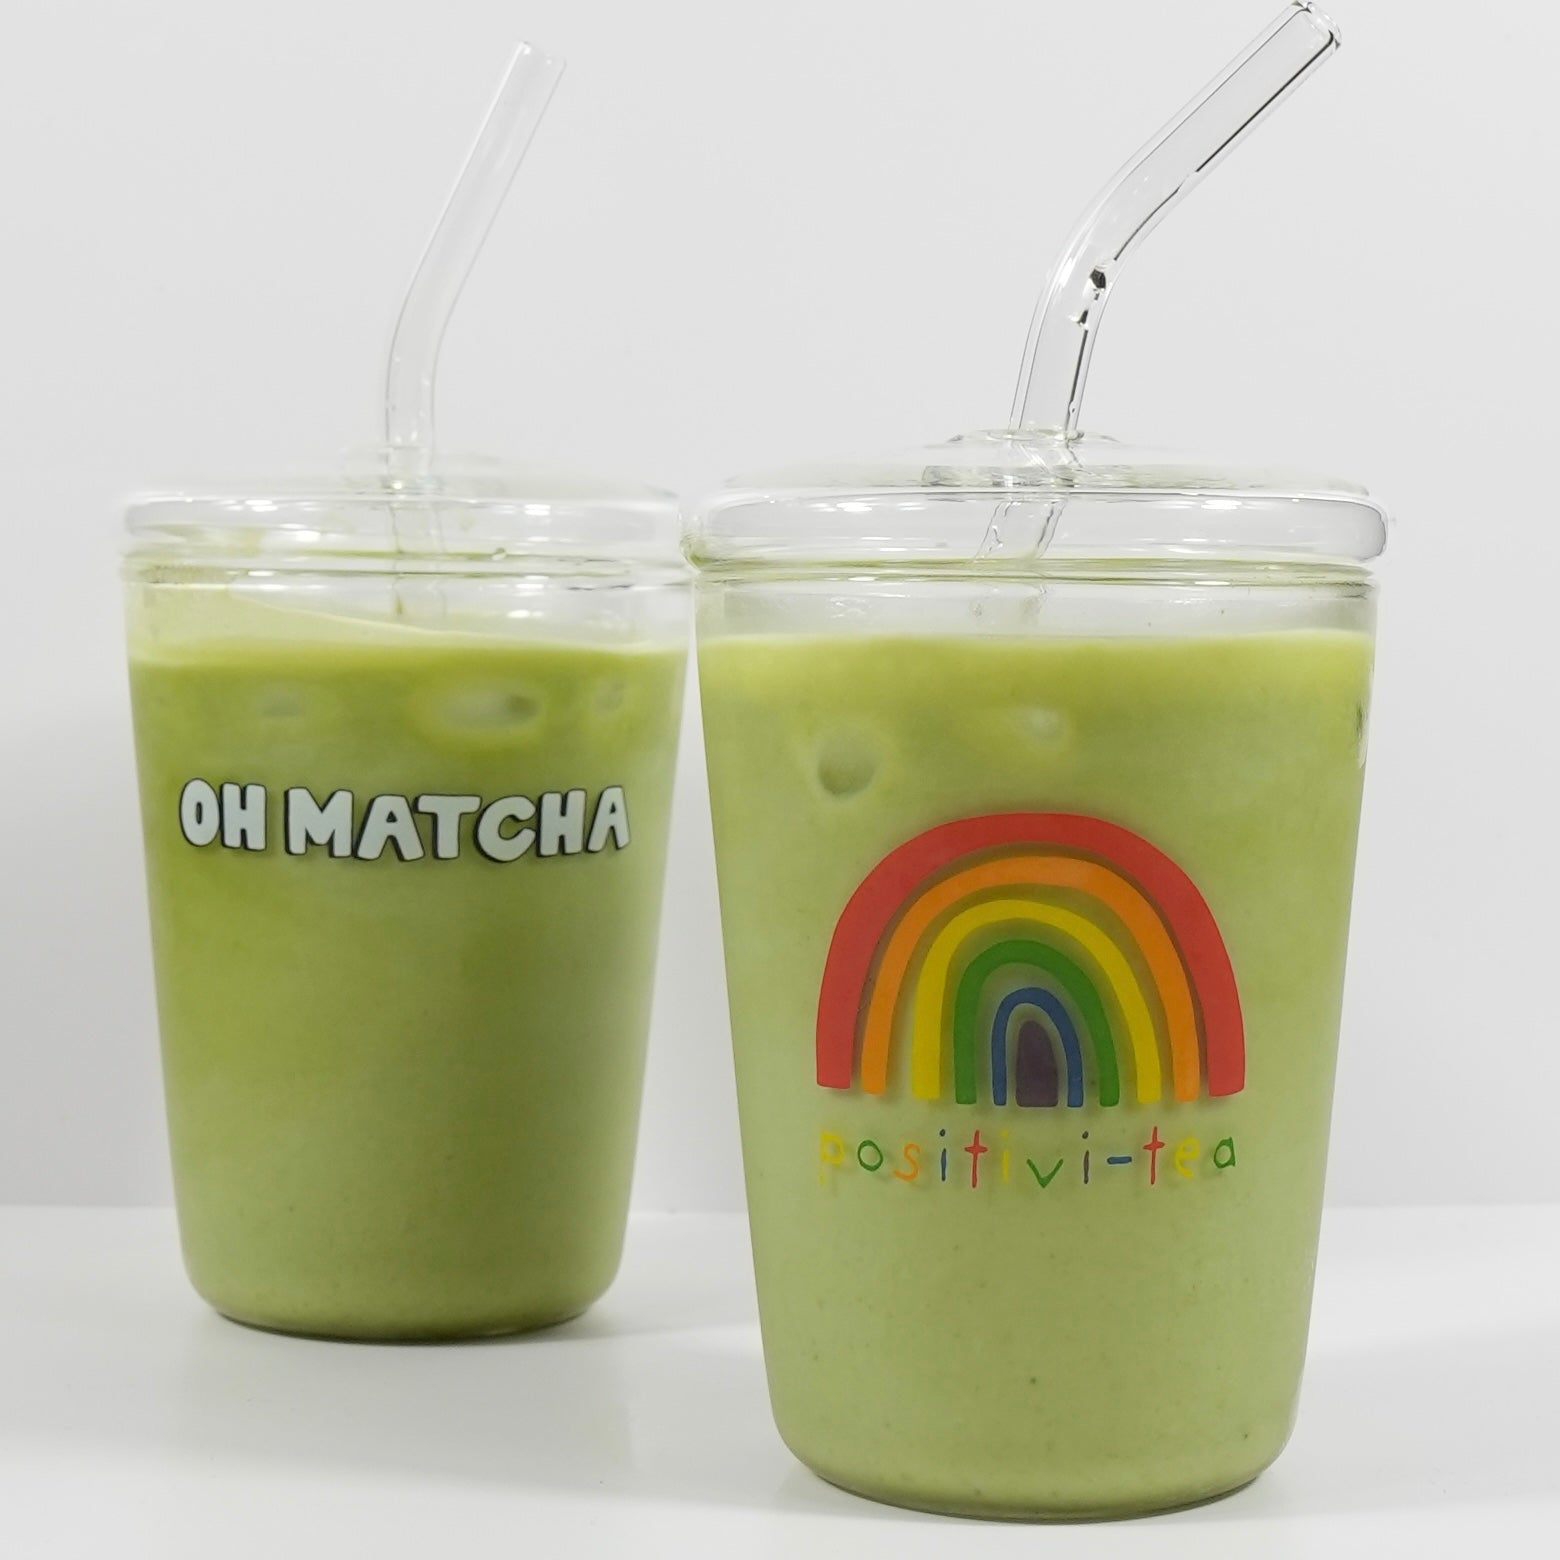 Positivi-tea Glass Cup and straw – Oh Matcha